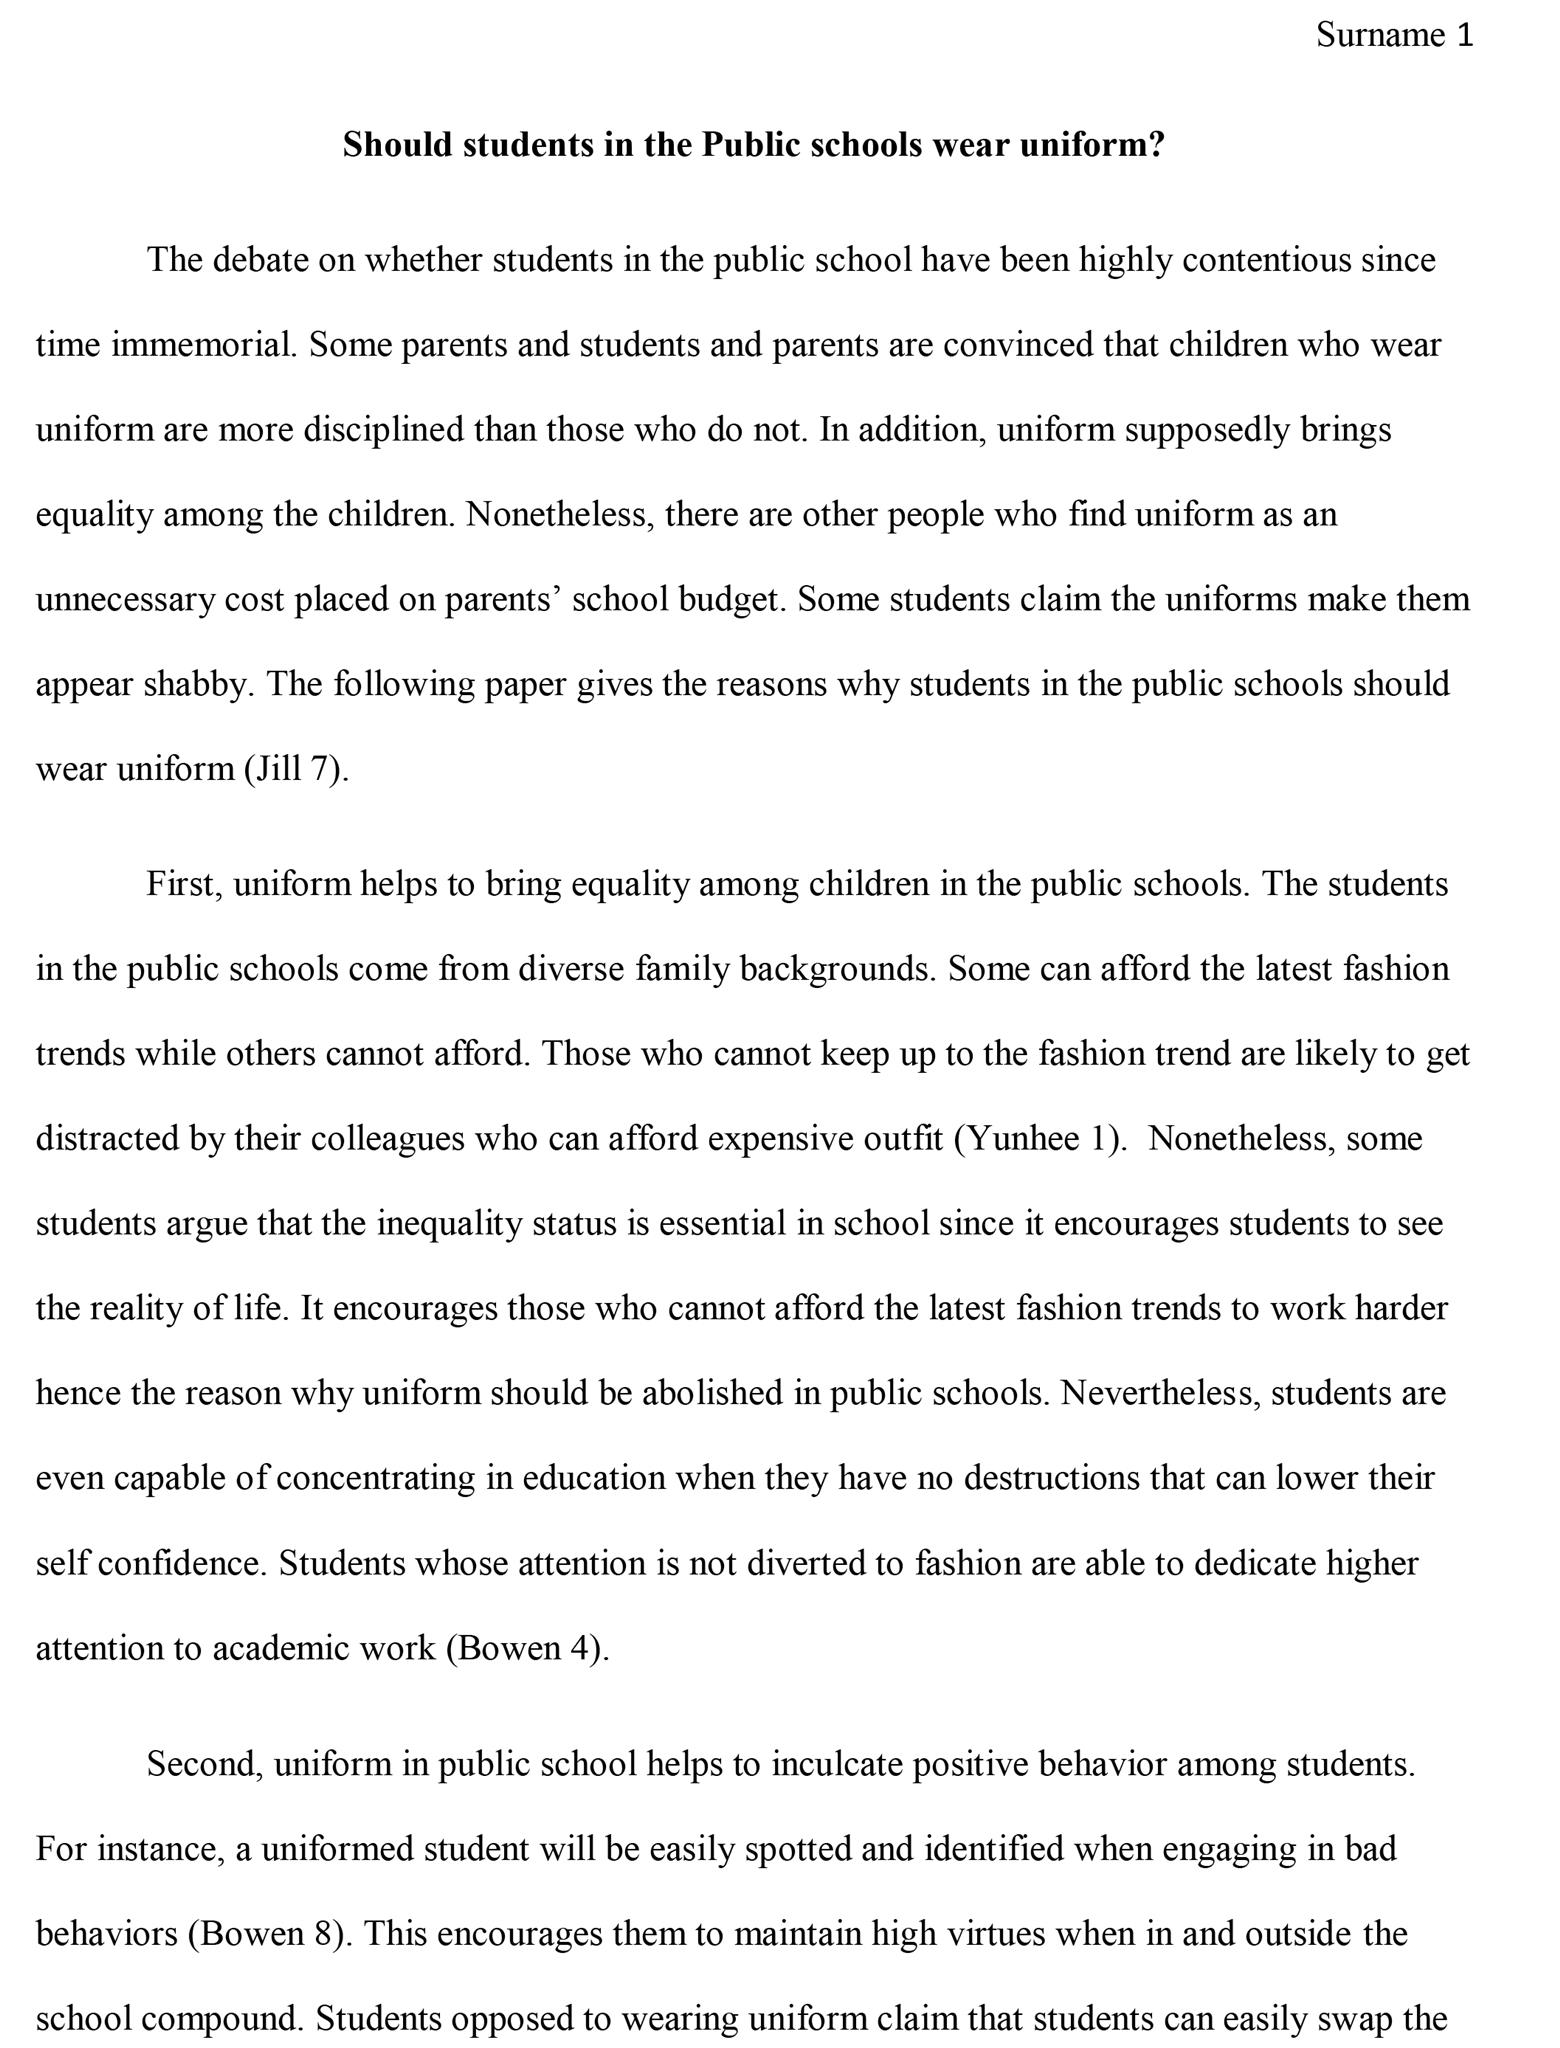 With or without school uniform essay sample